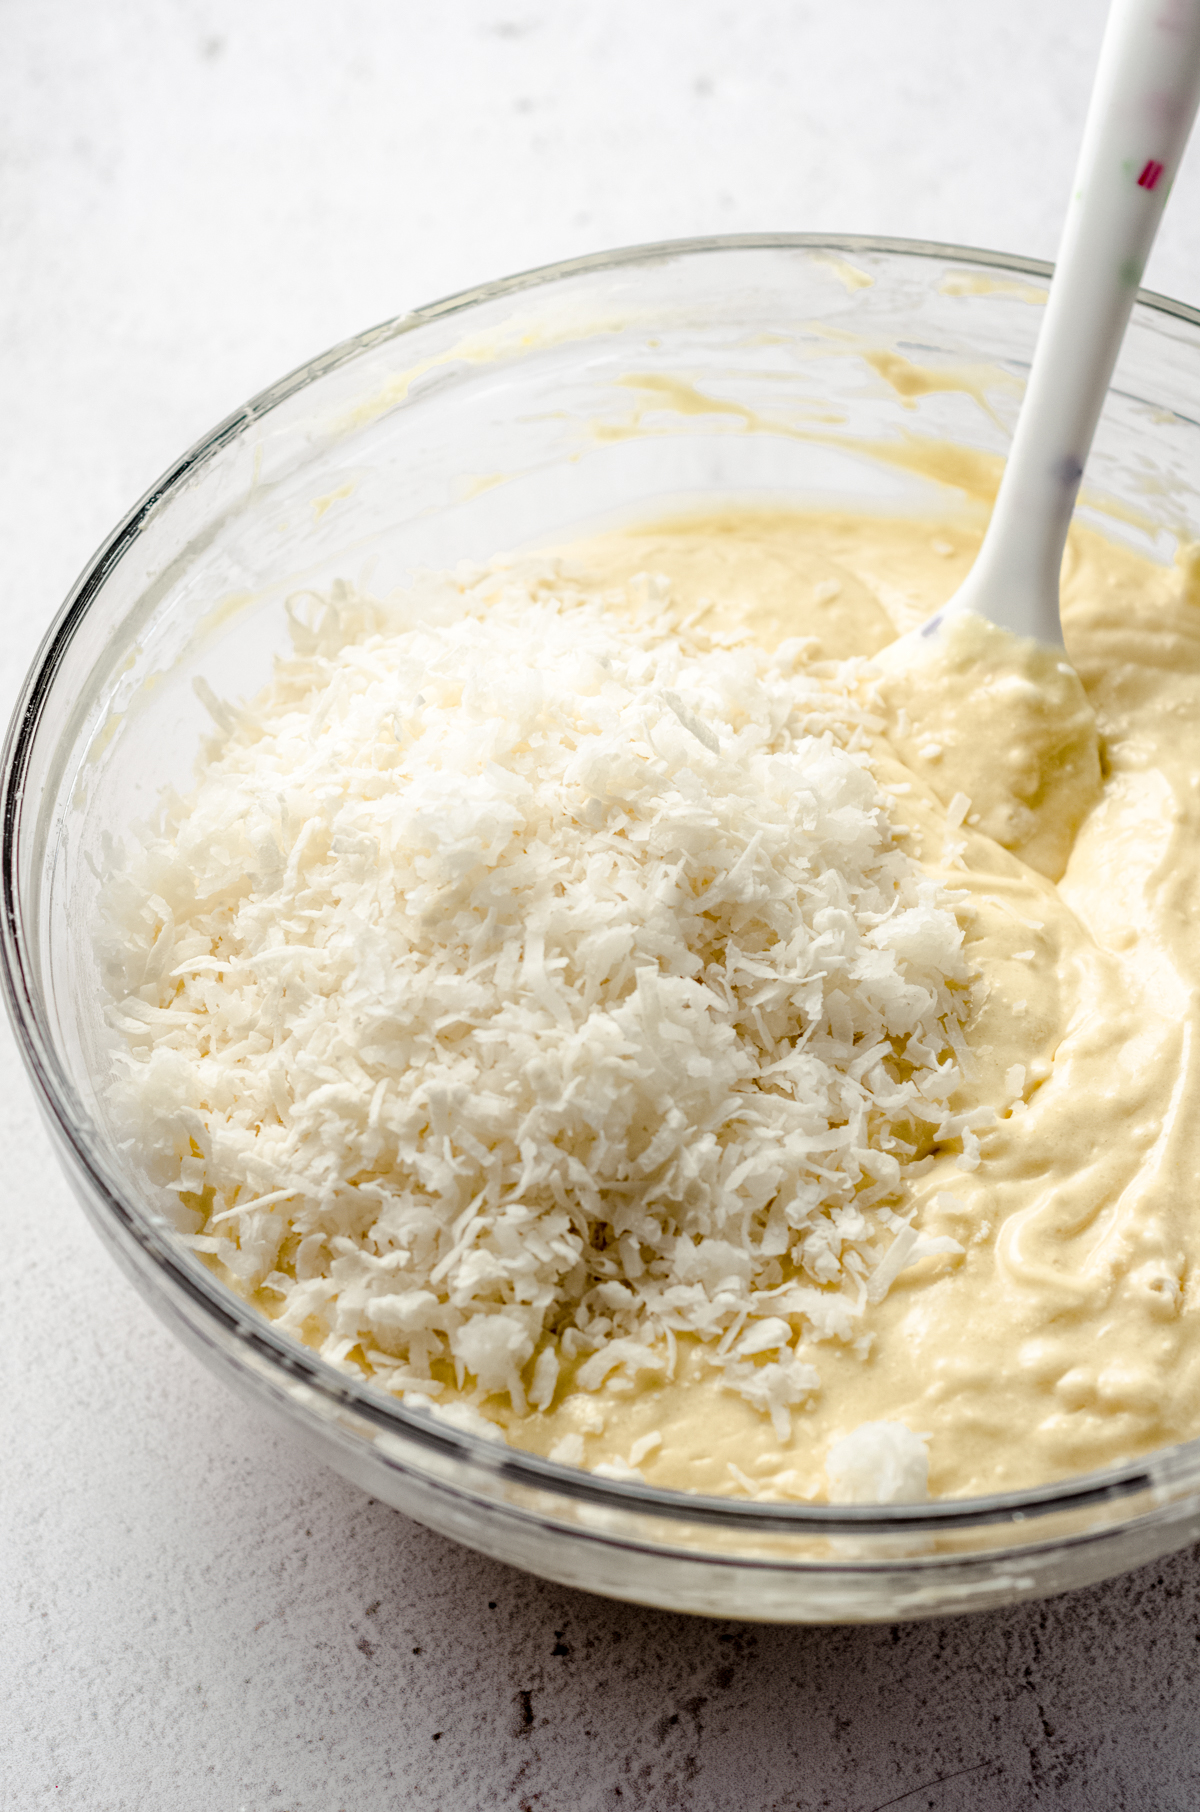 Glass mixing bowl with cake batter and shredded coconut with rubber spatula. 